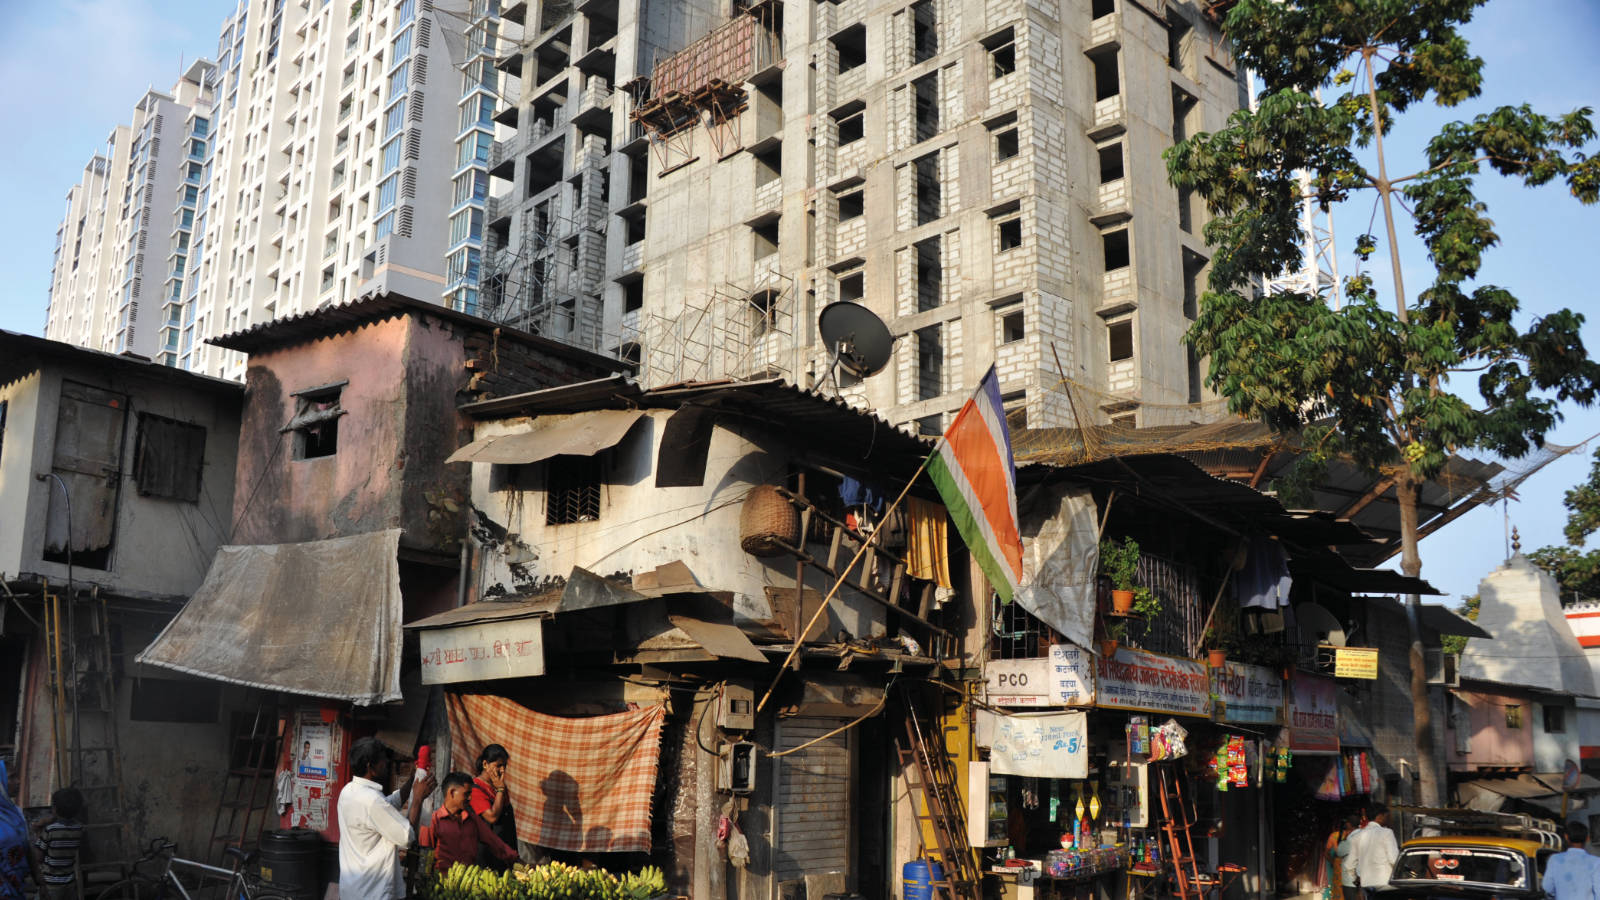 Inner-city disparities in Mumbai in a confined space: slum settlement in front of high-rise buildings